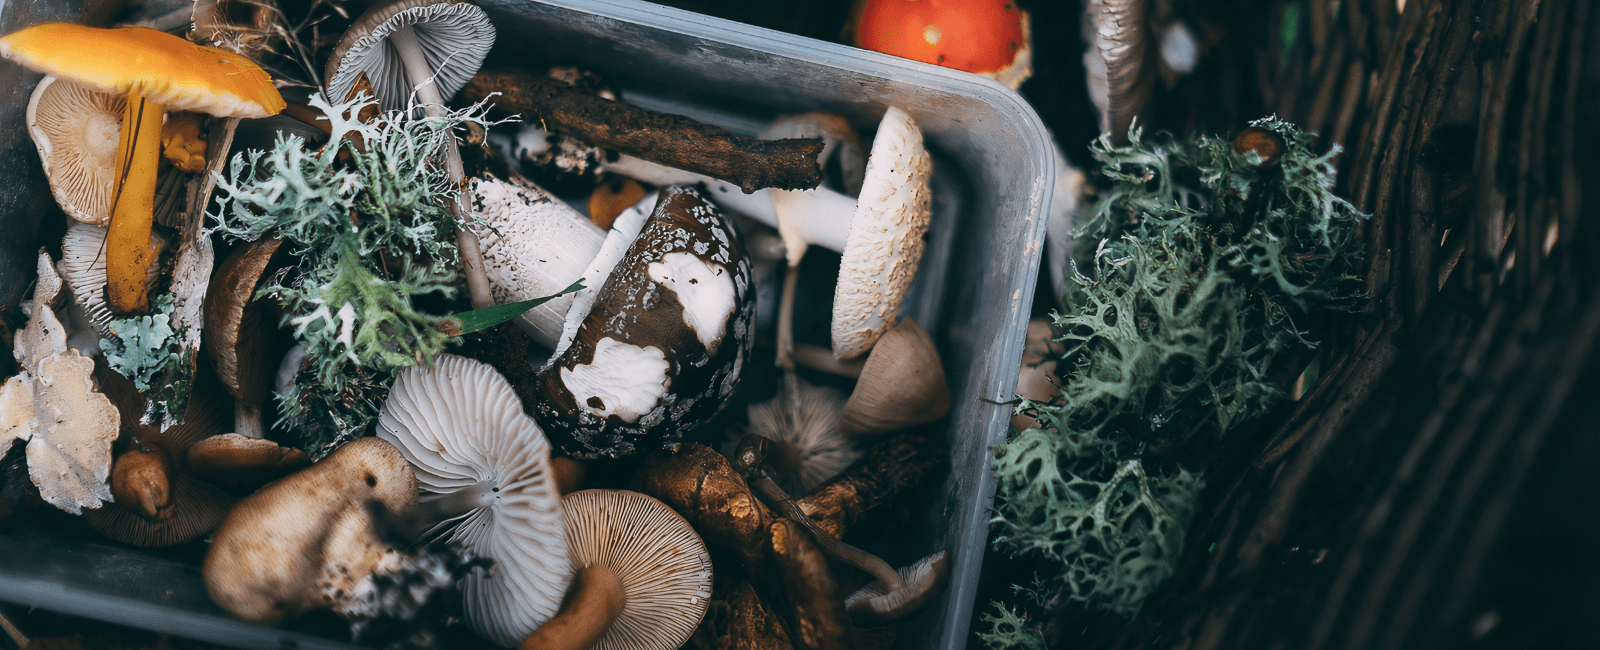 Cultivating Community: 5 of the Best Mushroom Forums